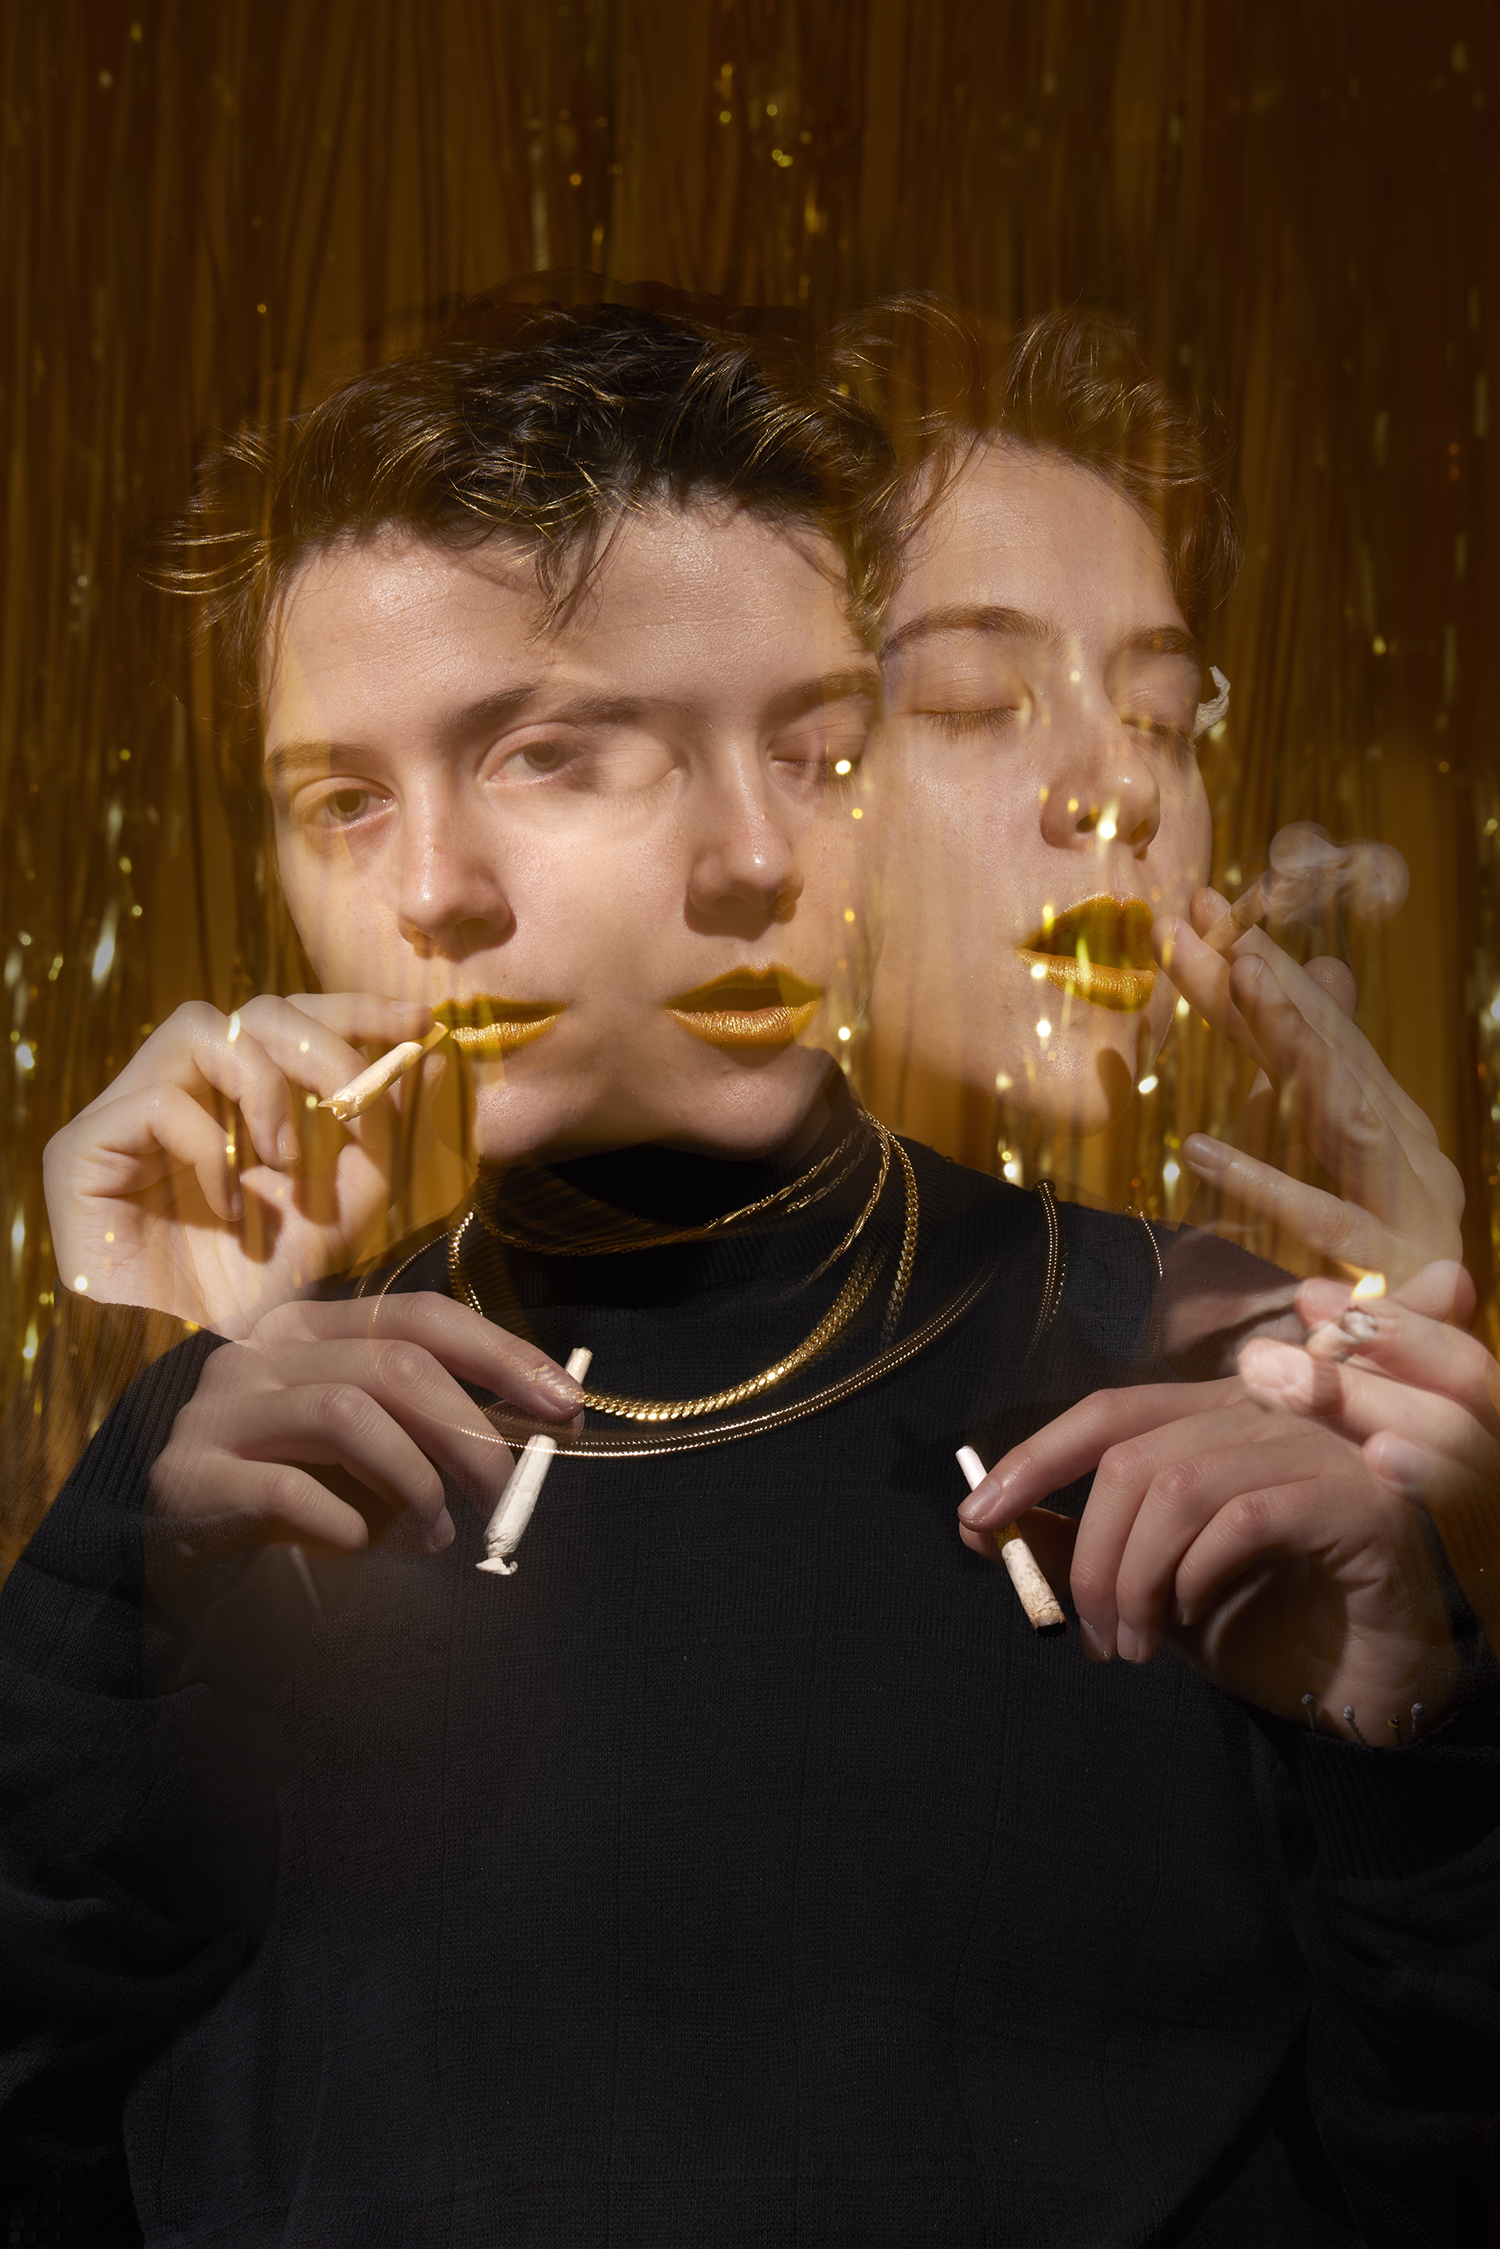 A person smoking against a gold background.